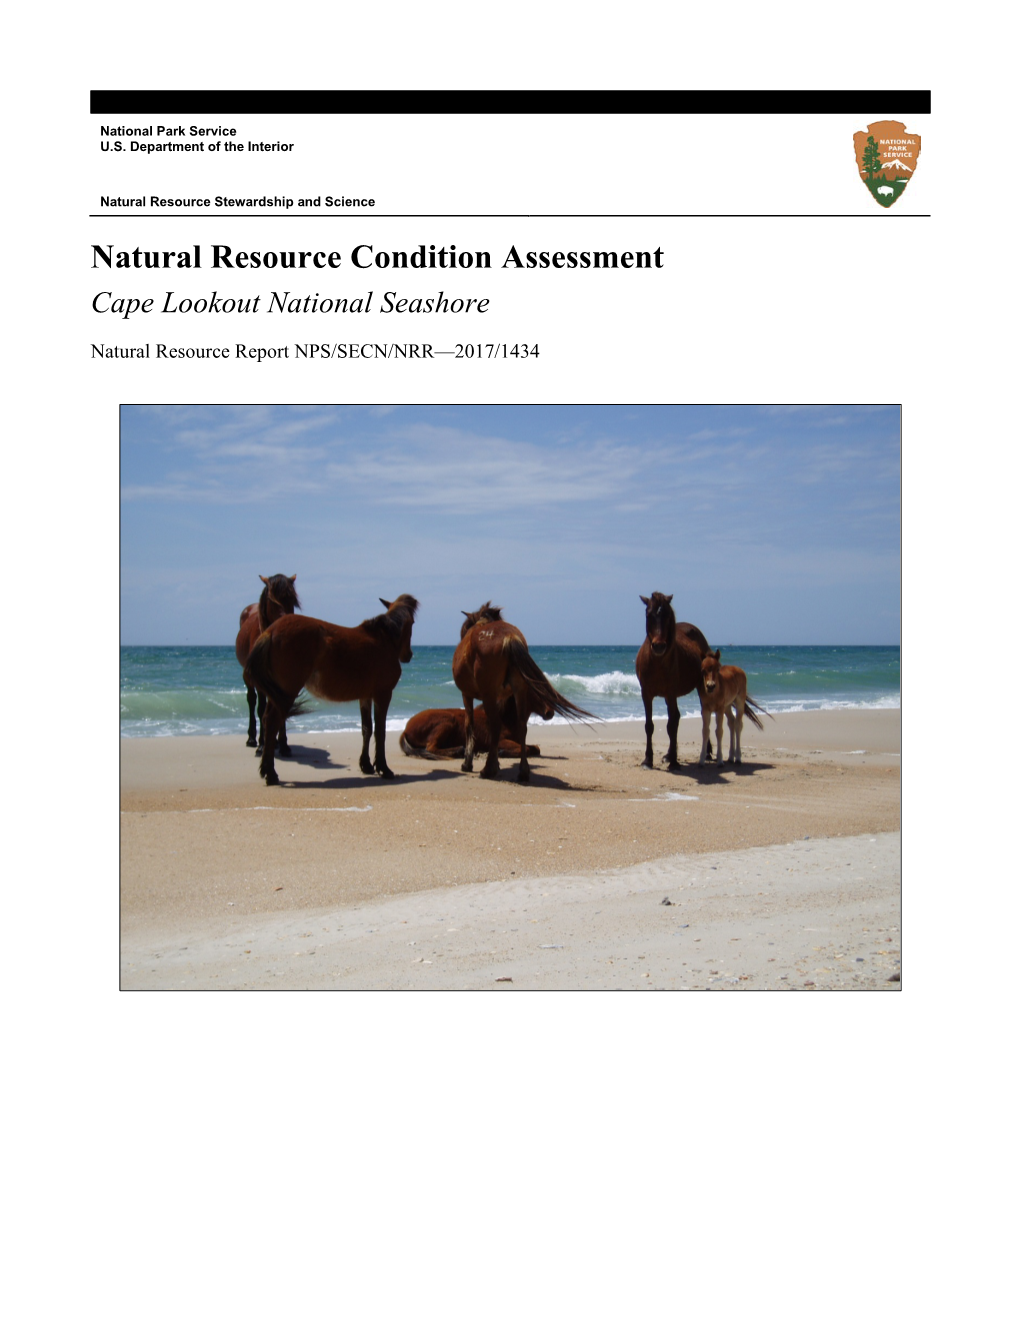 Natural Resource Condition Assessment: Cape Lookout National Seashore